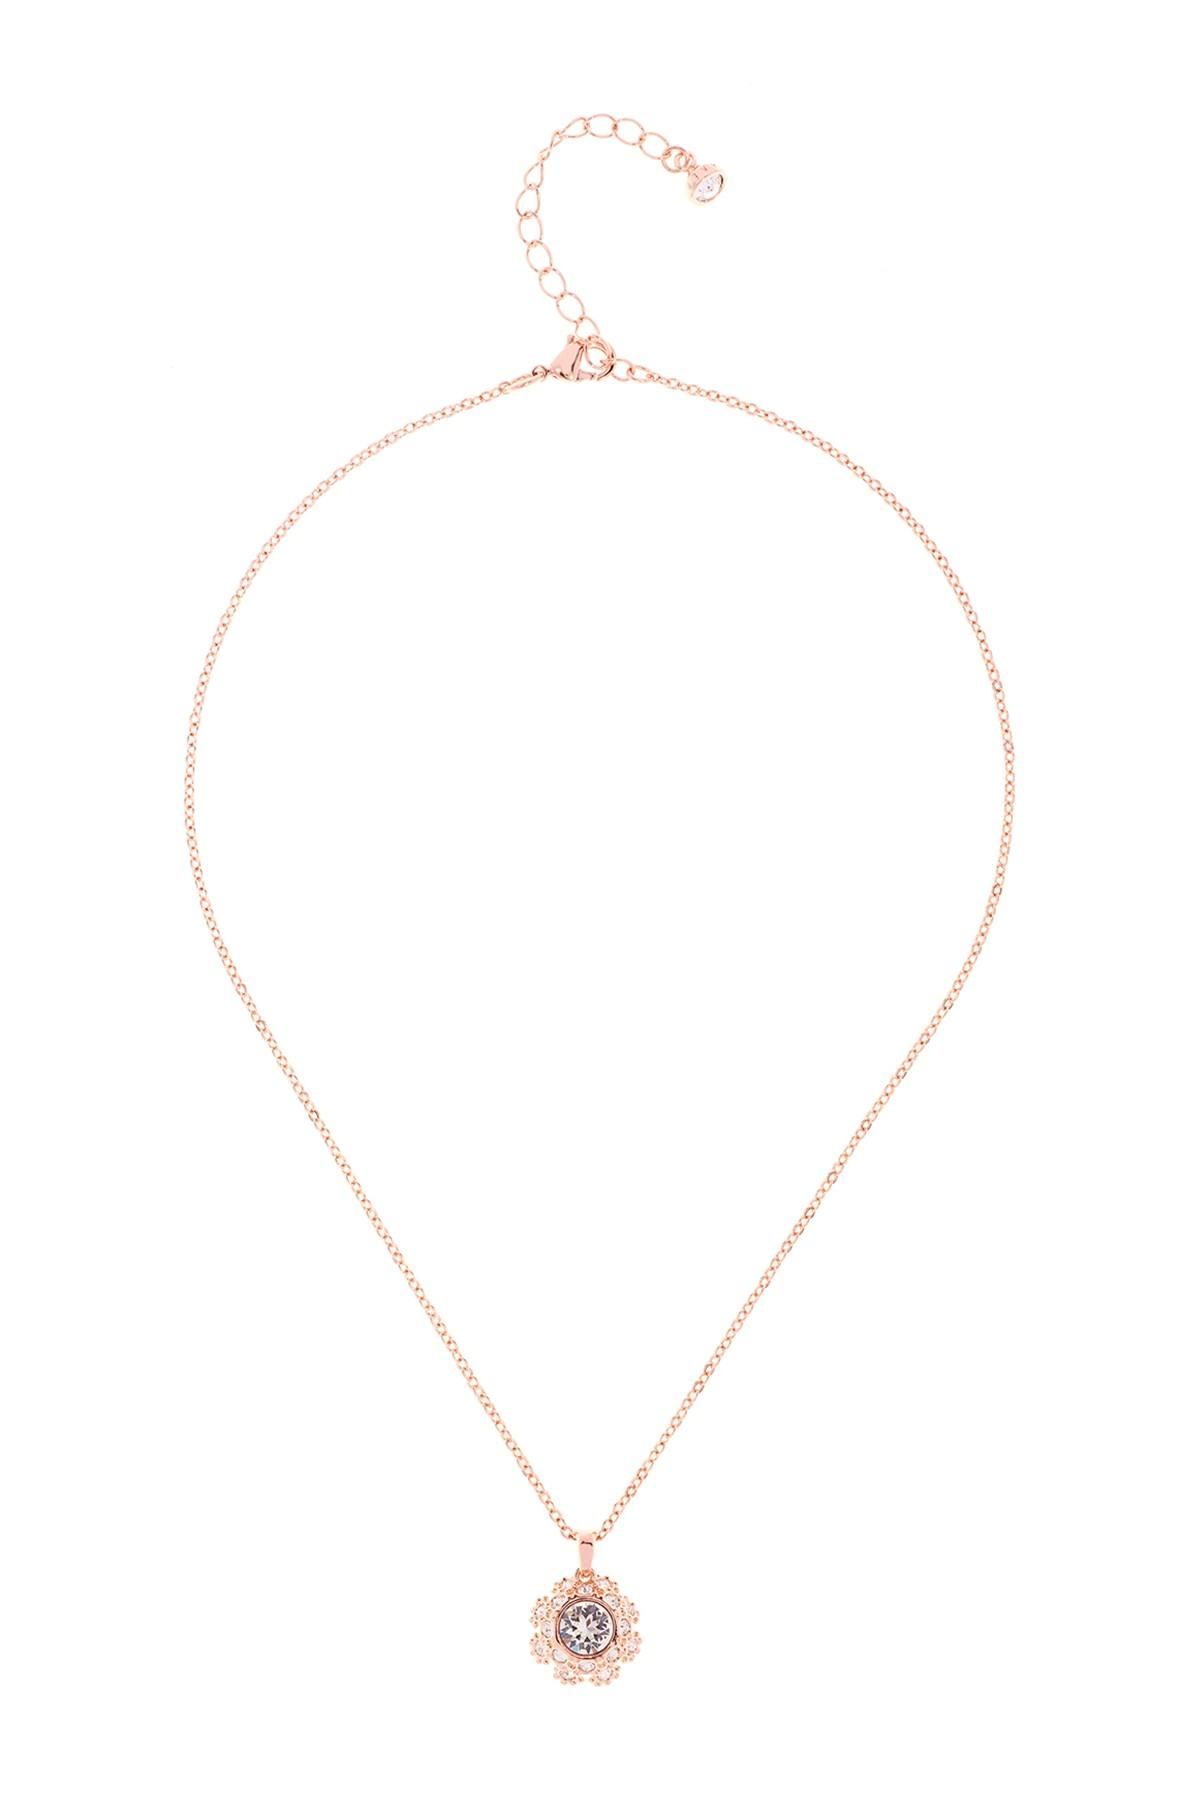 Lyst – Ted Baker Swarovski Crystal Embellished Sirou Crystal Daisy With Regard To Latest Heart Honeycomb Lace Pendant Necklaces (View 14 of 25)